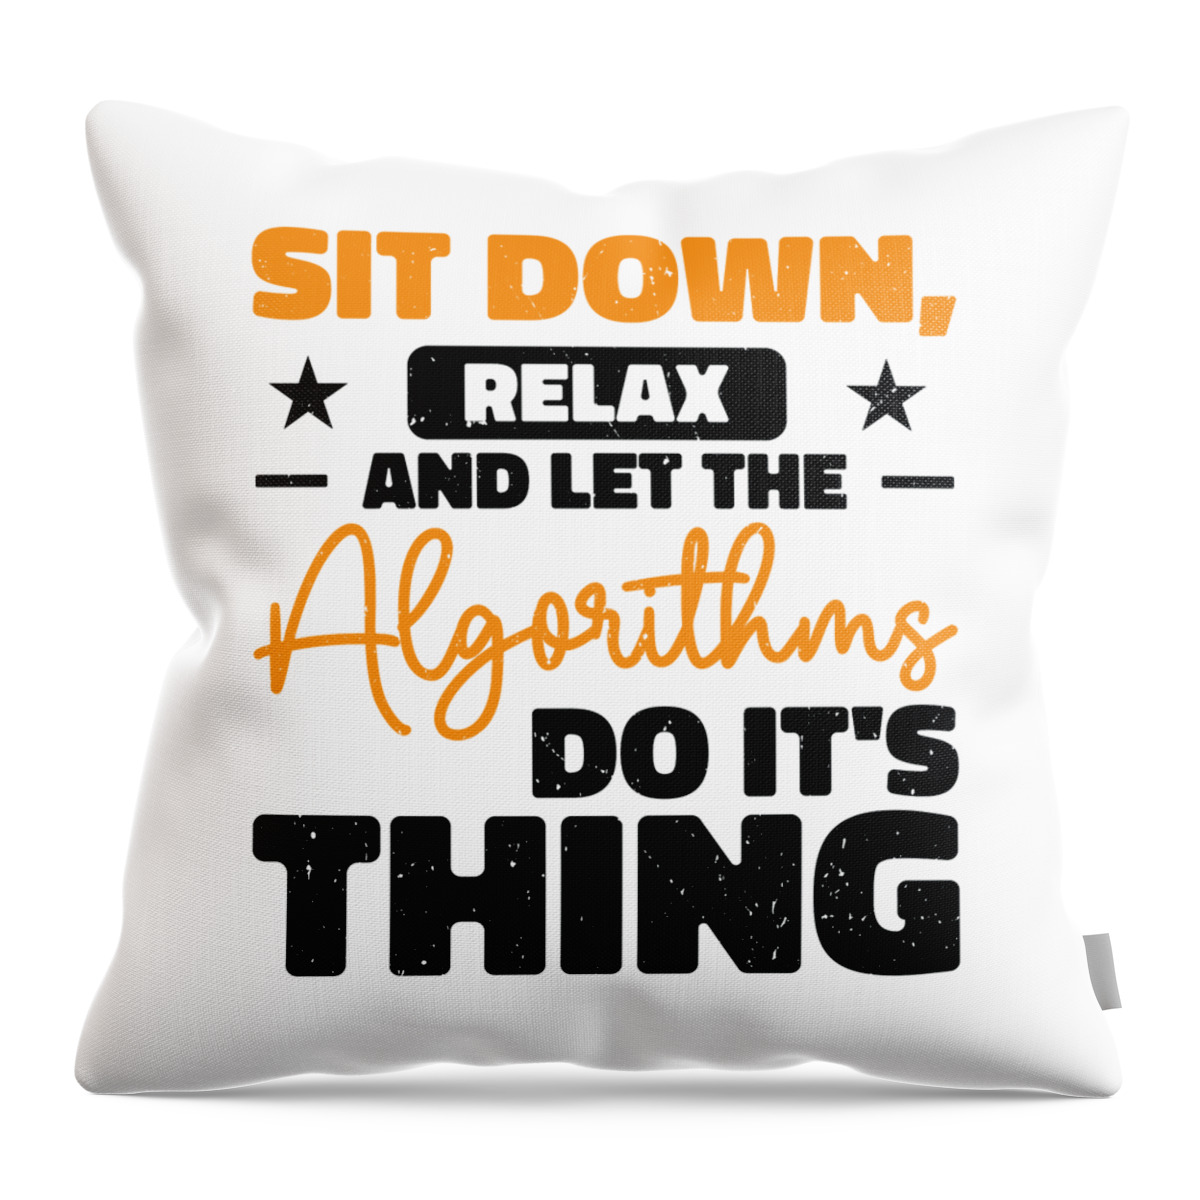 Computer Throw Pillow featuring the digital art Computer Algorithm Programmer Artificial Intelligence by Toms Tee Store